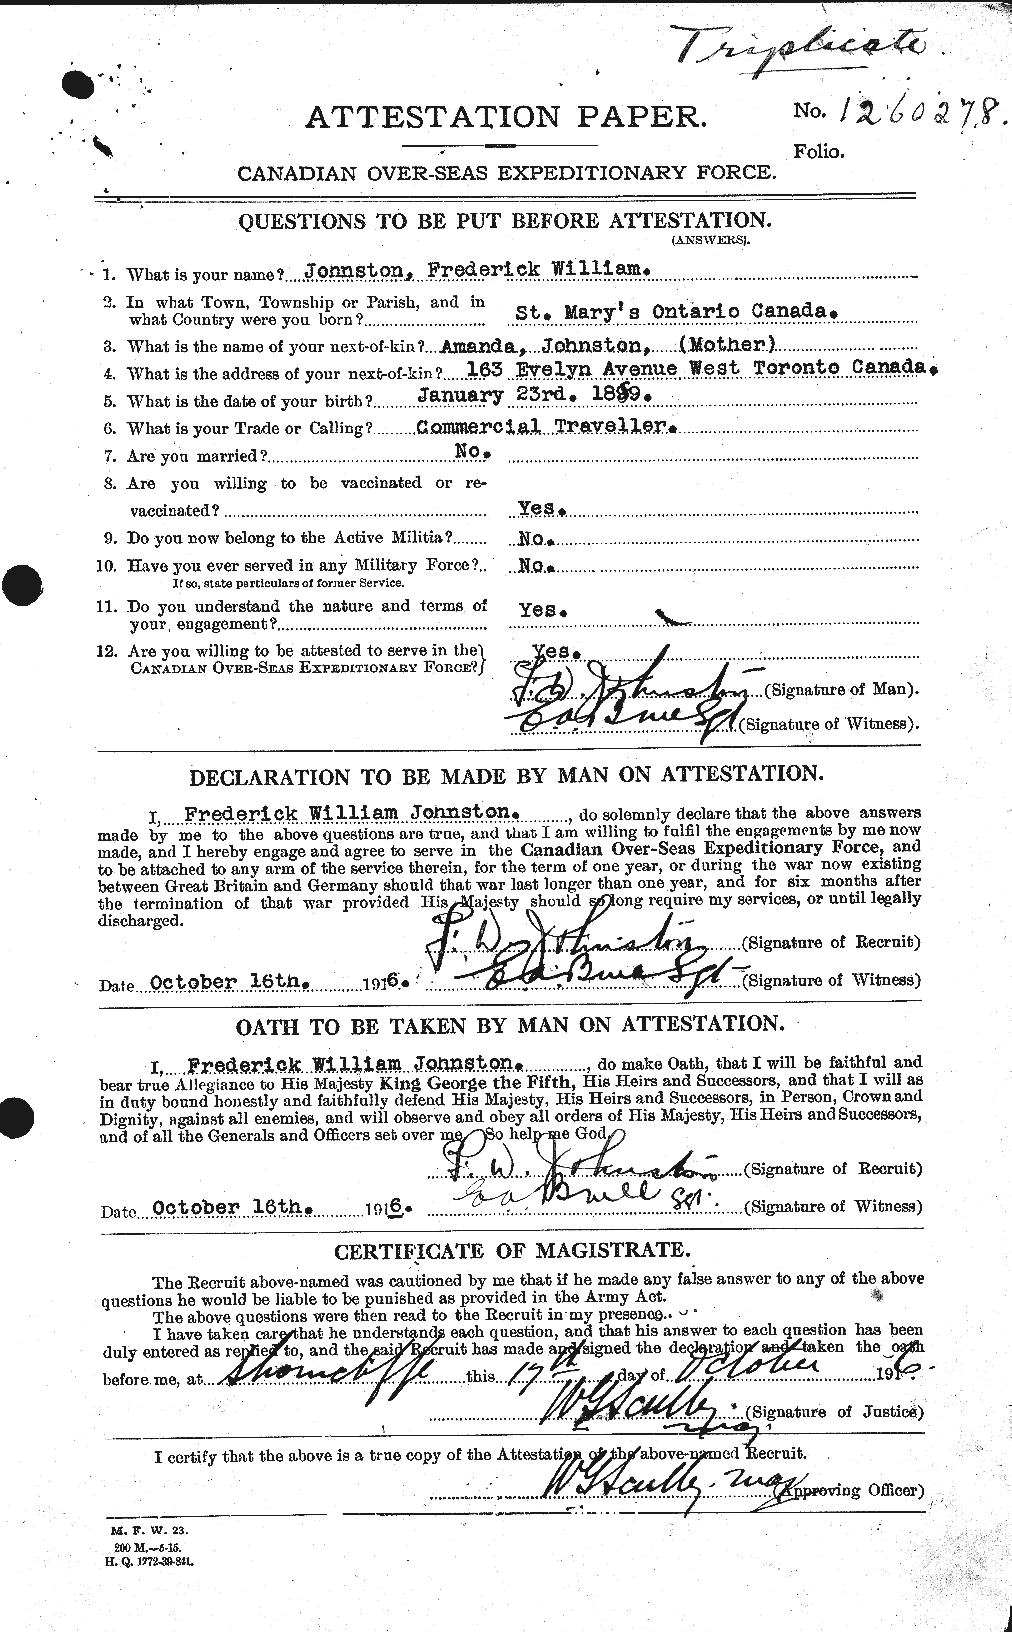 Personnel Records of the First World War - CEF 423304a